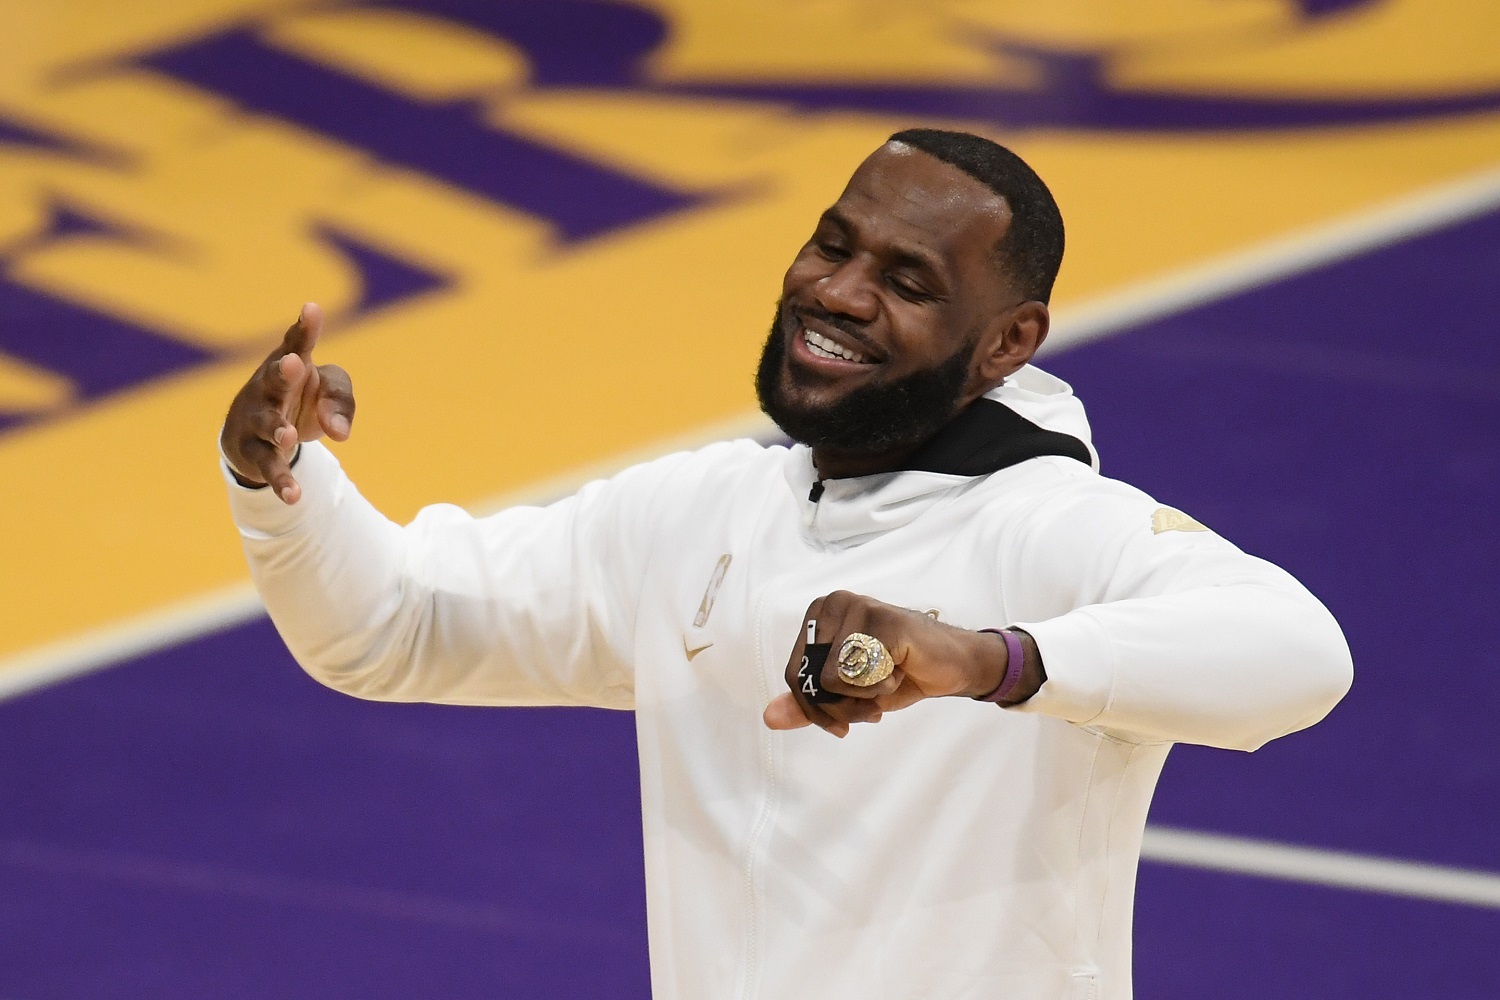 The LA Lakers' 2020 NBA Championship Rings Are the Most Expensive in History